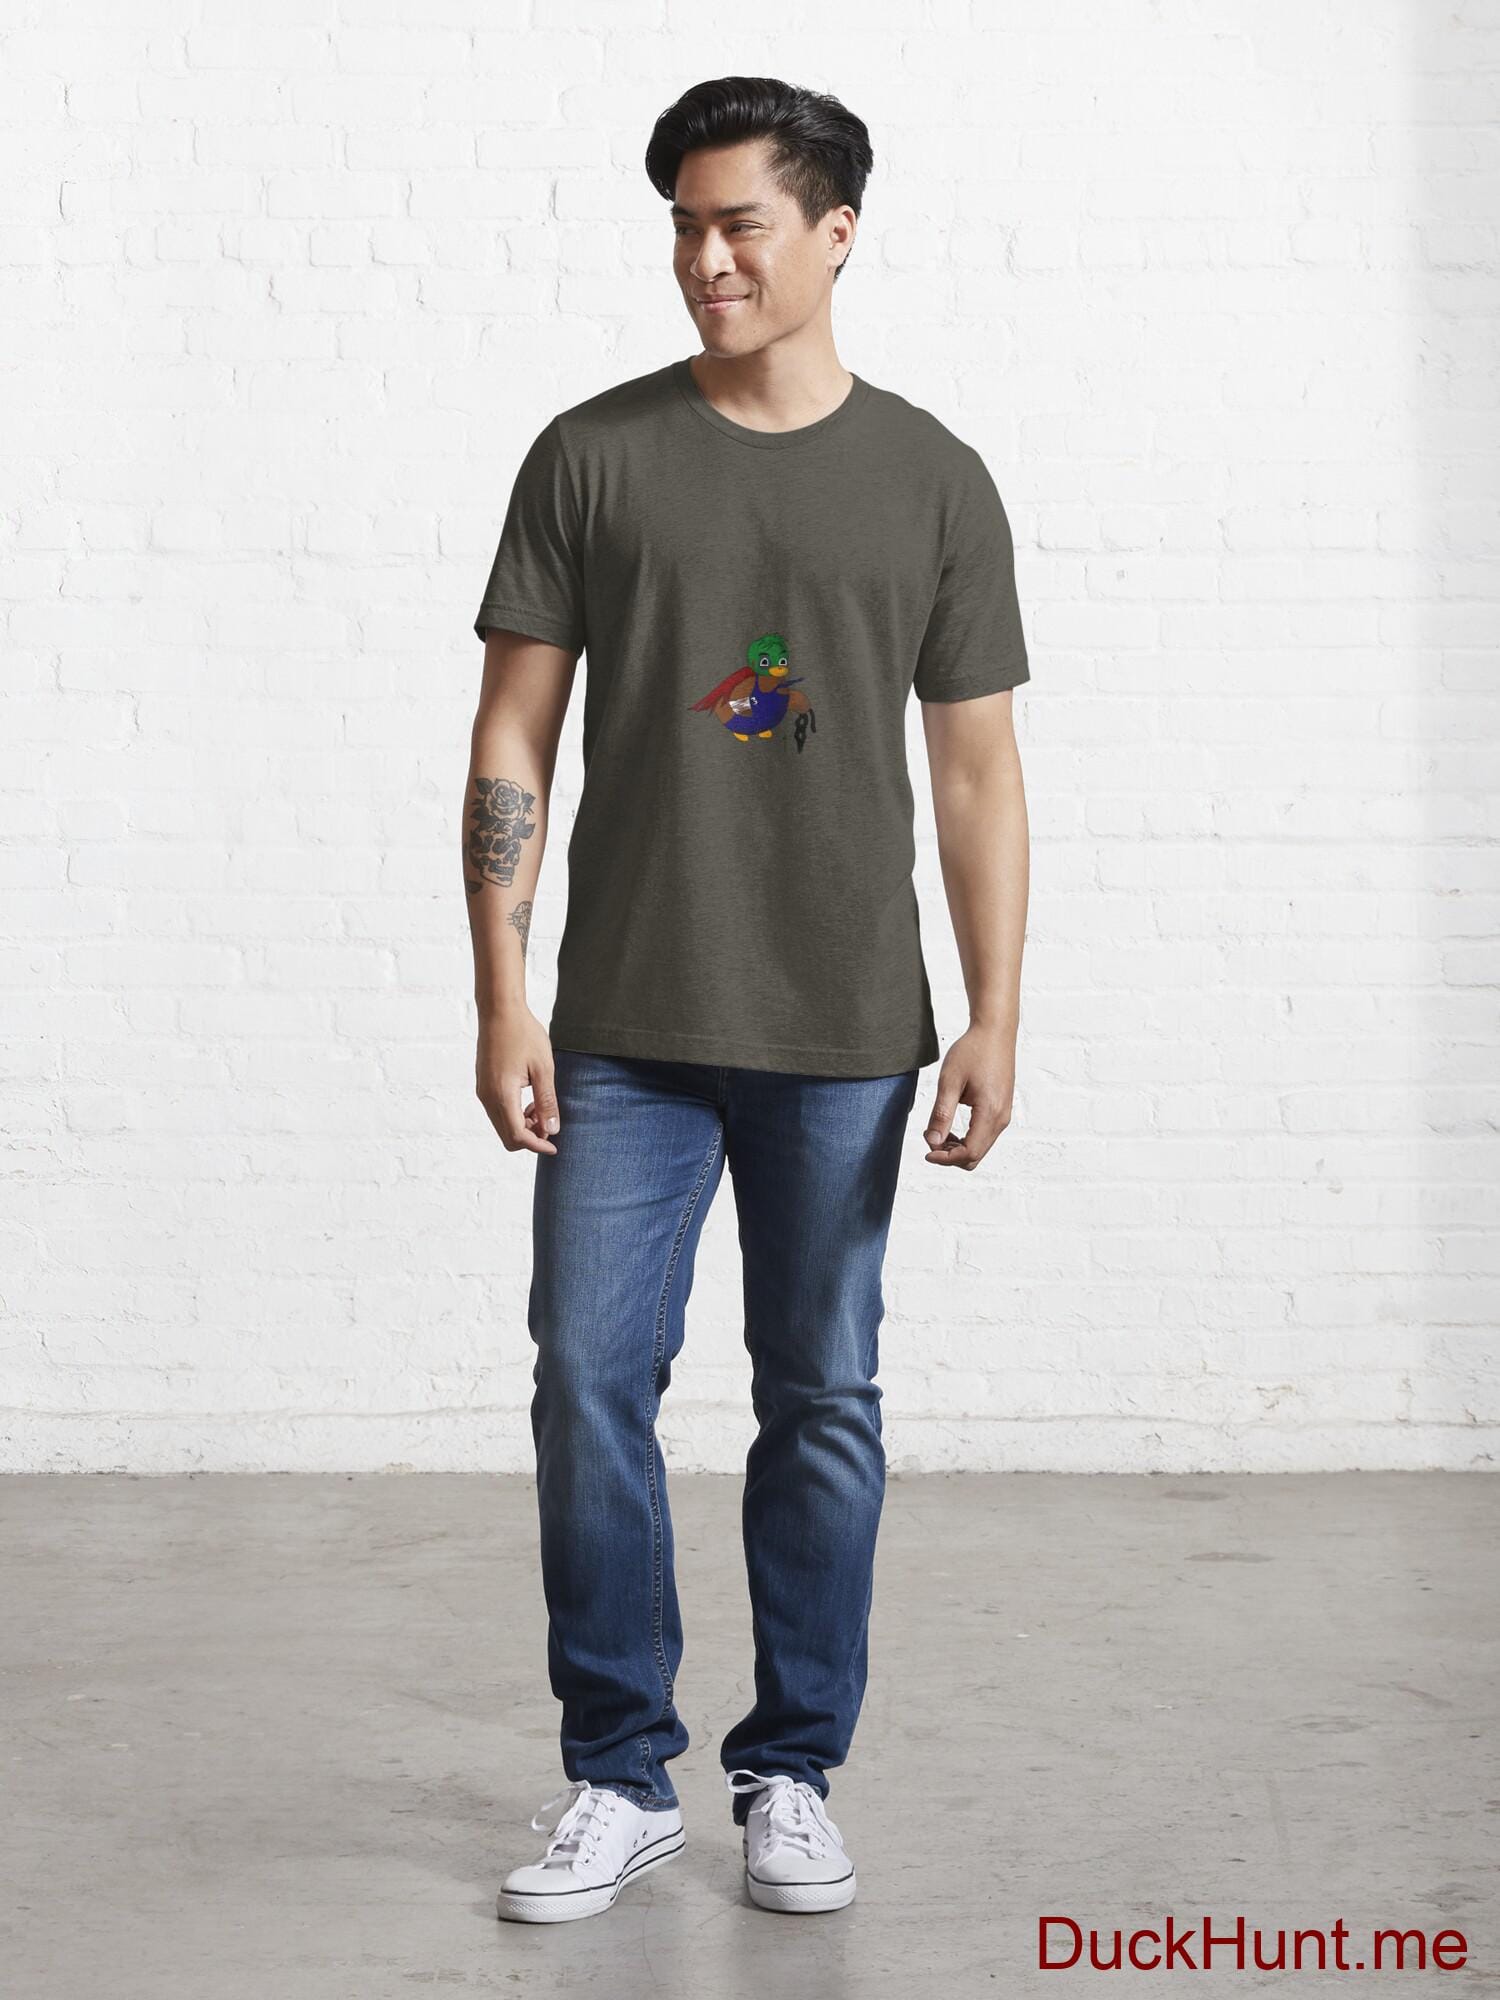 Dead DuckHunt Boss (smokeless) Army Essential T-Shirt (Front printed) alternative image 4